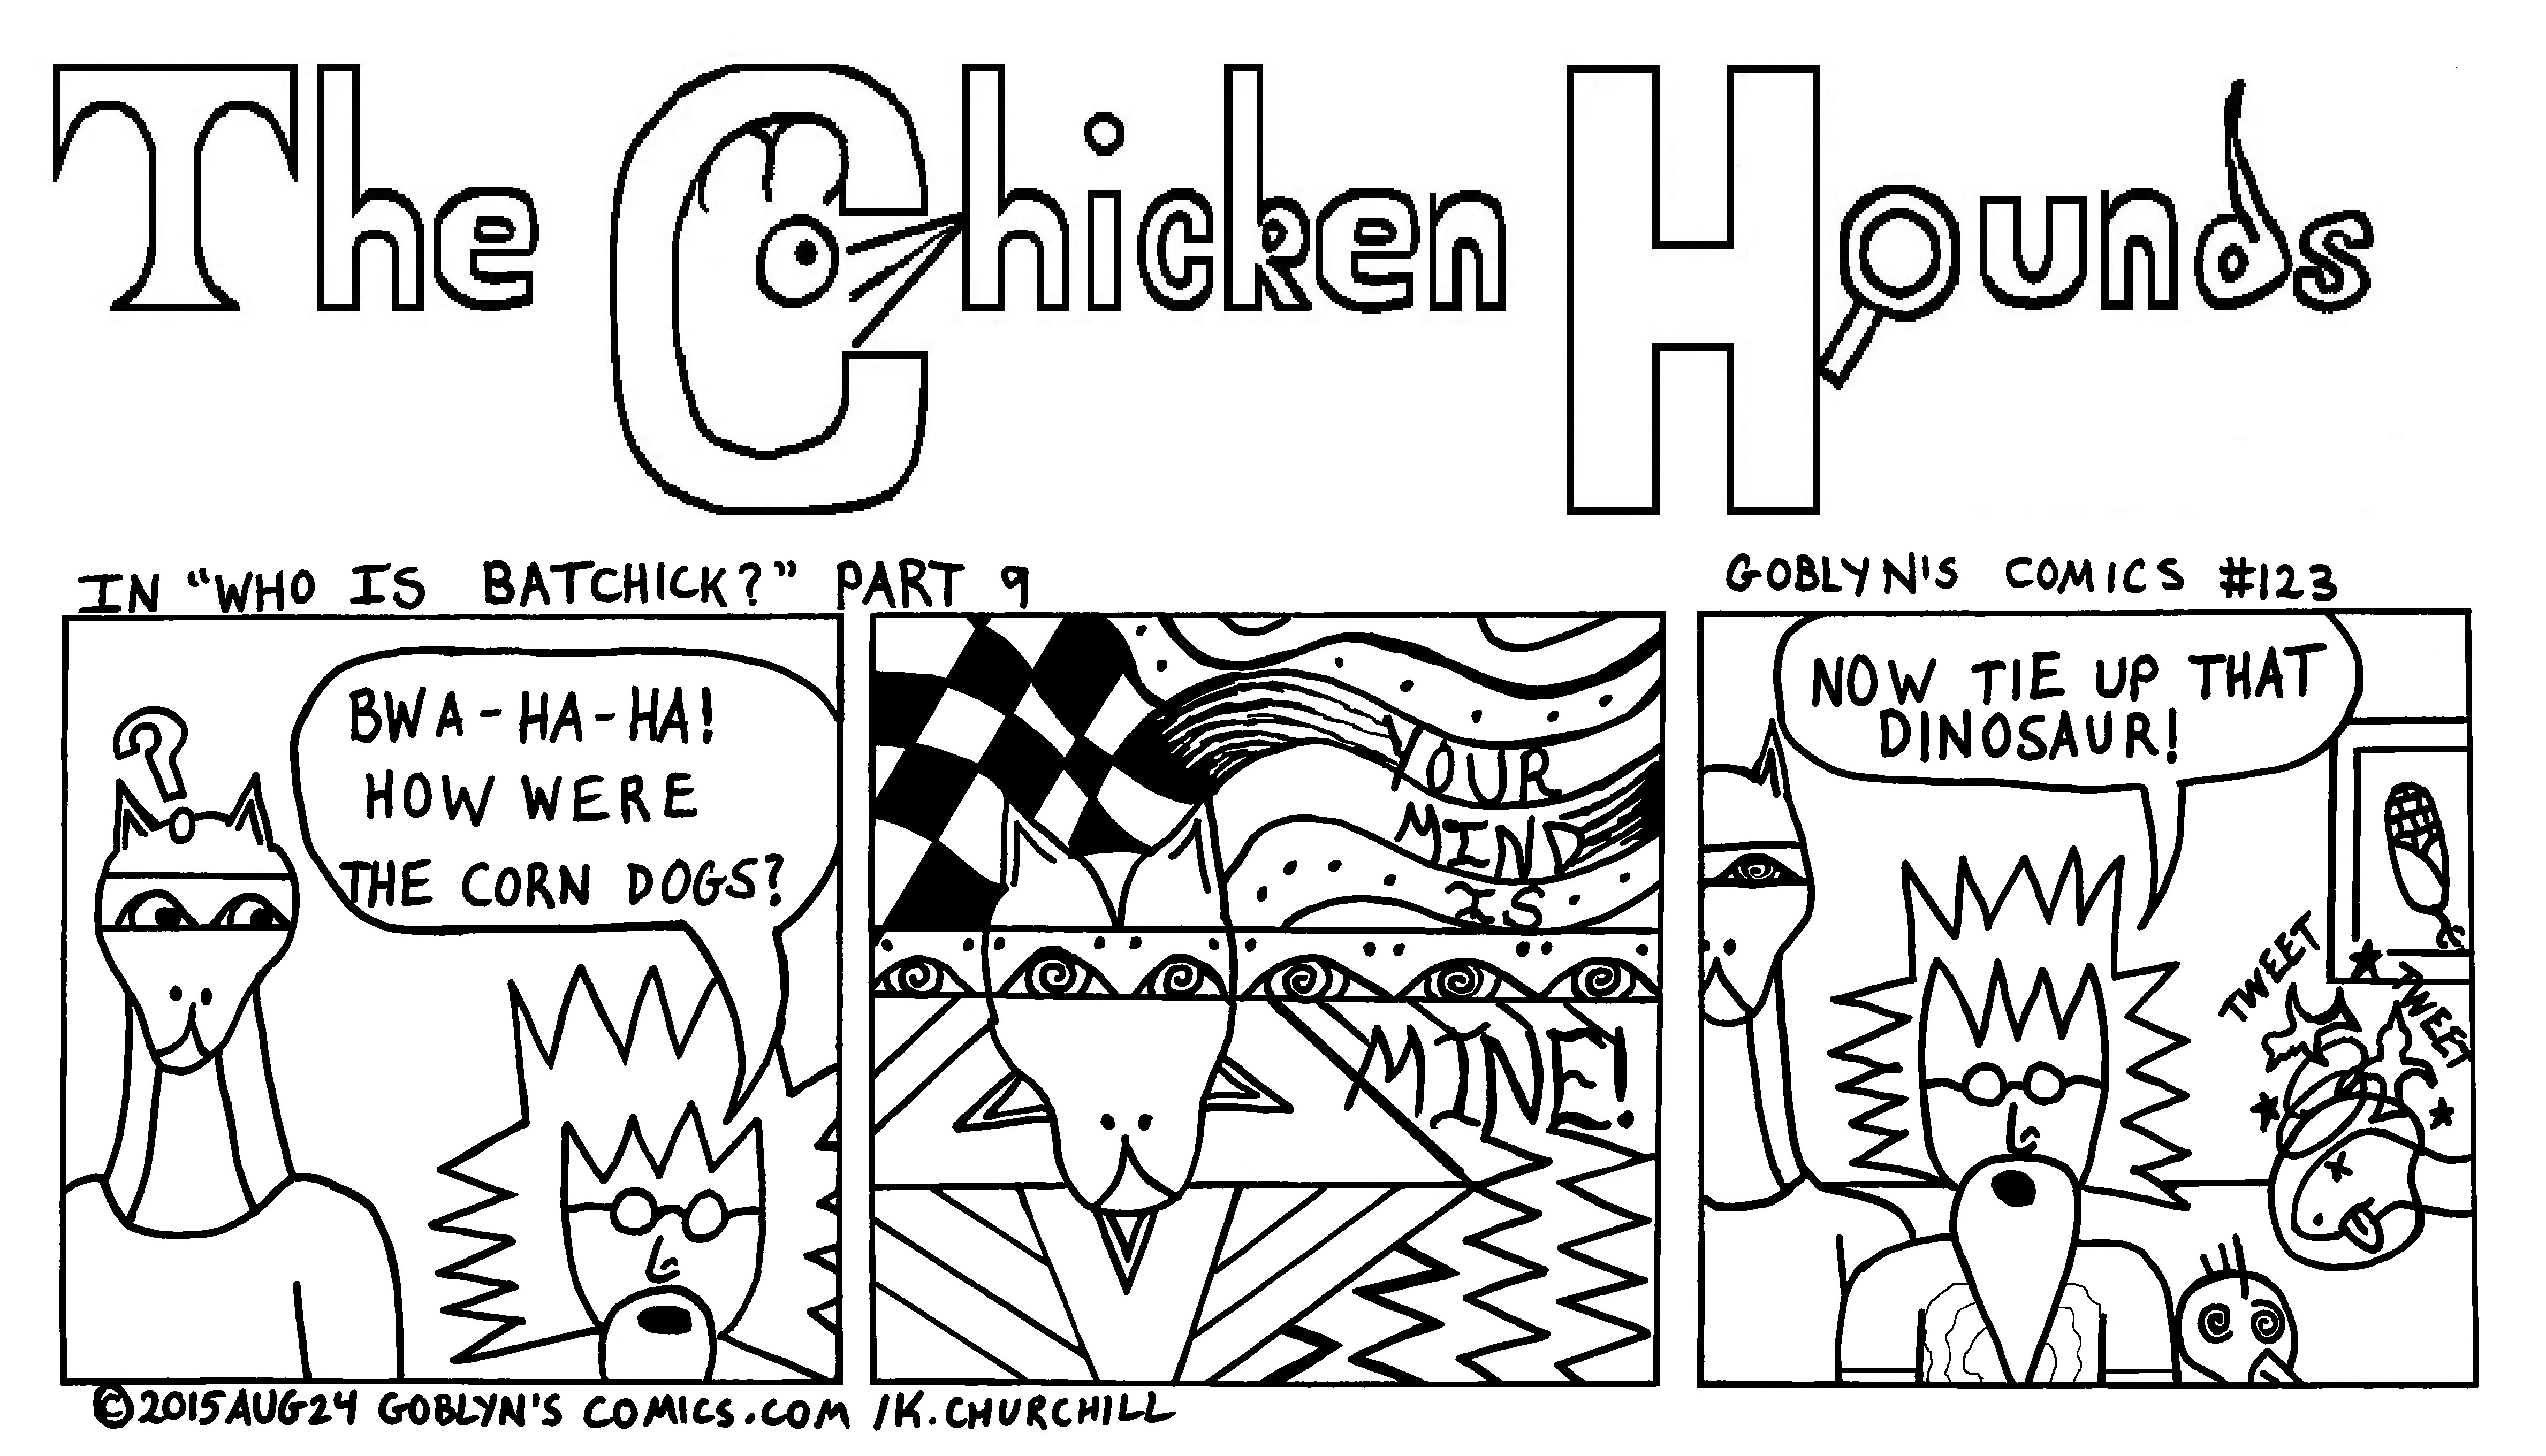 Chicken Hounds in "Who is BatChick?" part 9